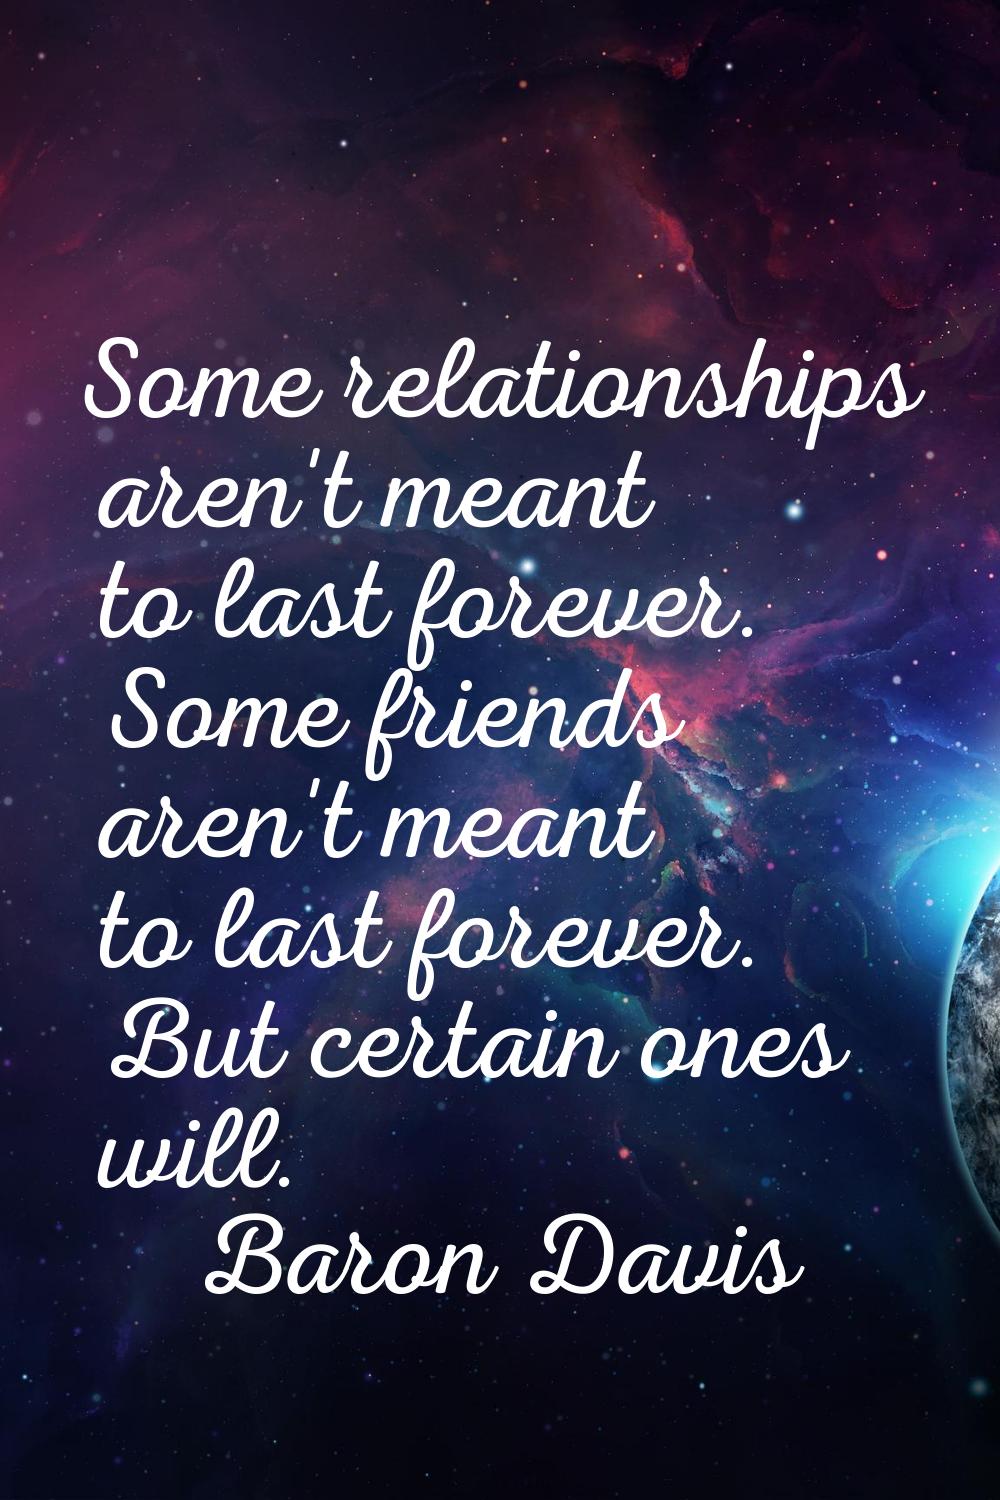 Some relationships aren't meant to last forever. Some friends aren't meant to last forever. But cer